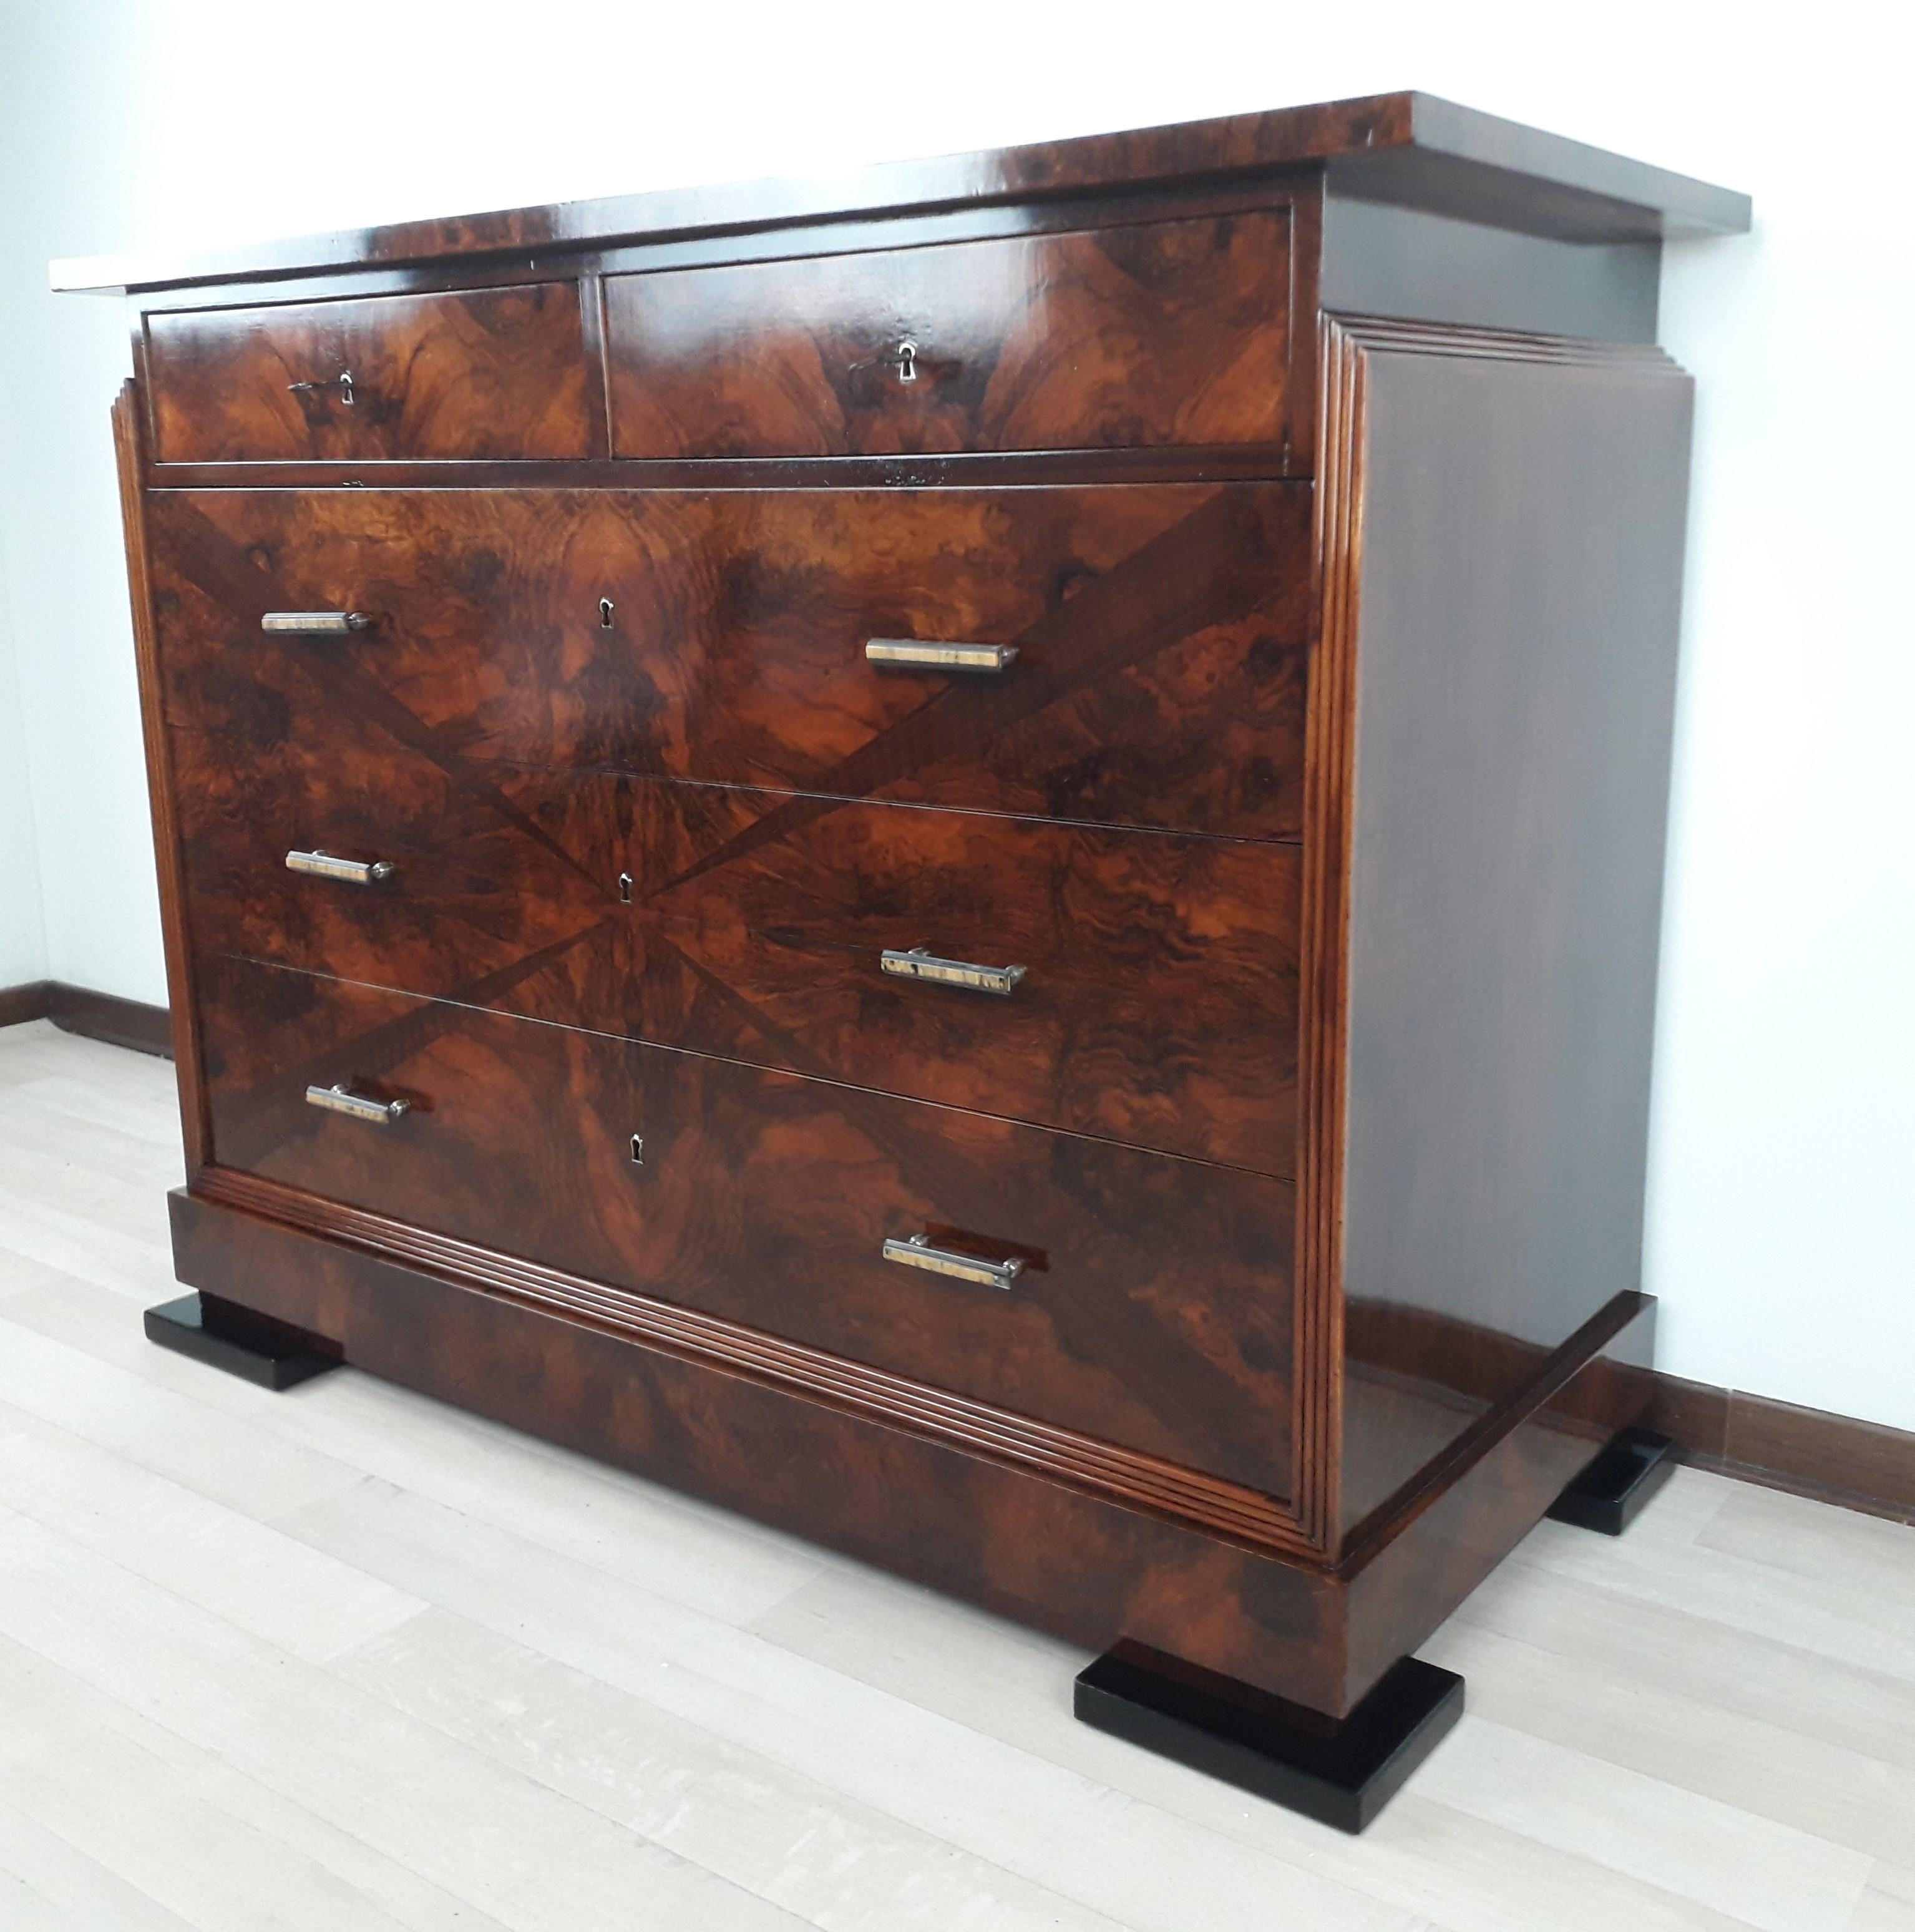 Spectacular Art Dèco Masonic Dresser made entirely of Walnut Burl with side profiles in Blonde Walnut striped.
Drawer fronts in Walnut Burl with St. Andrew's cross inlaid in Rosewood in three-dimensional form.
Original Brass and Bakelite 3-component